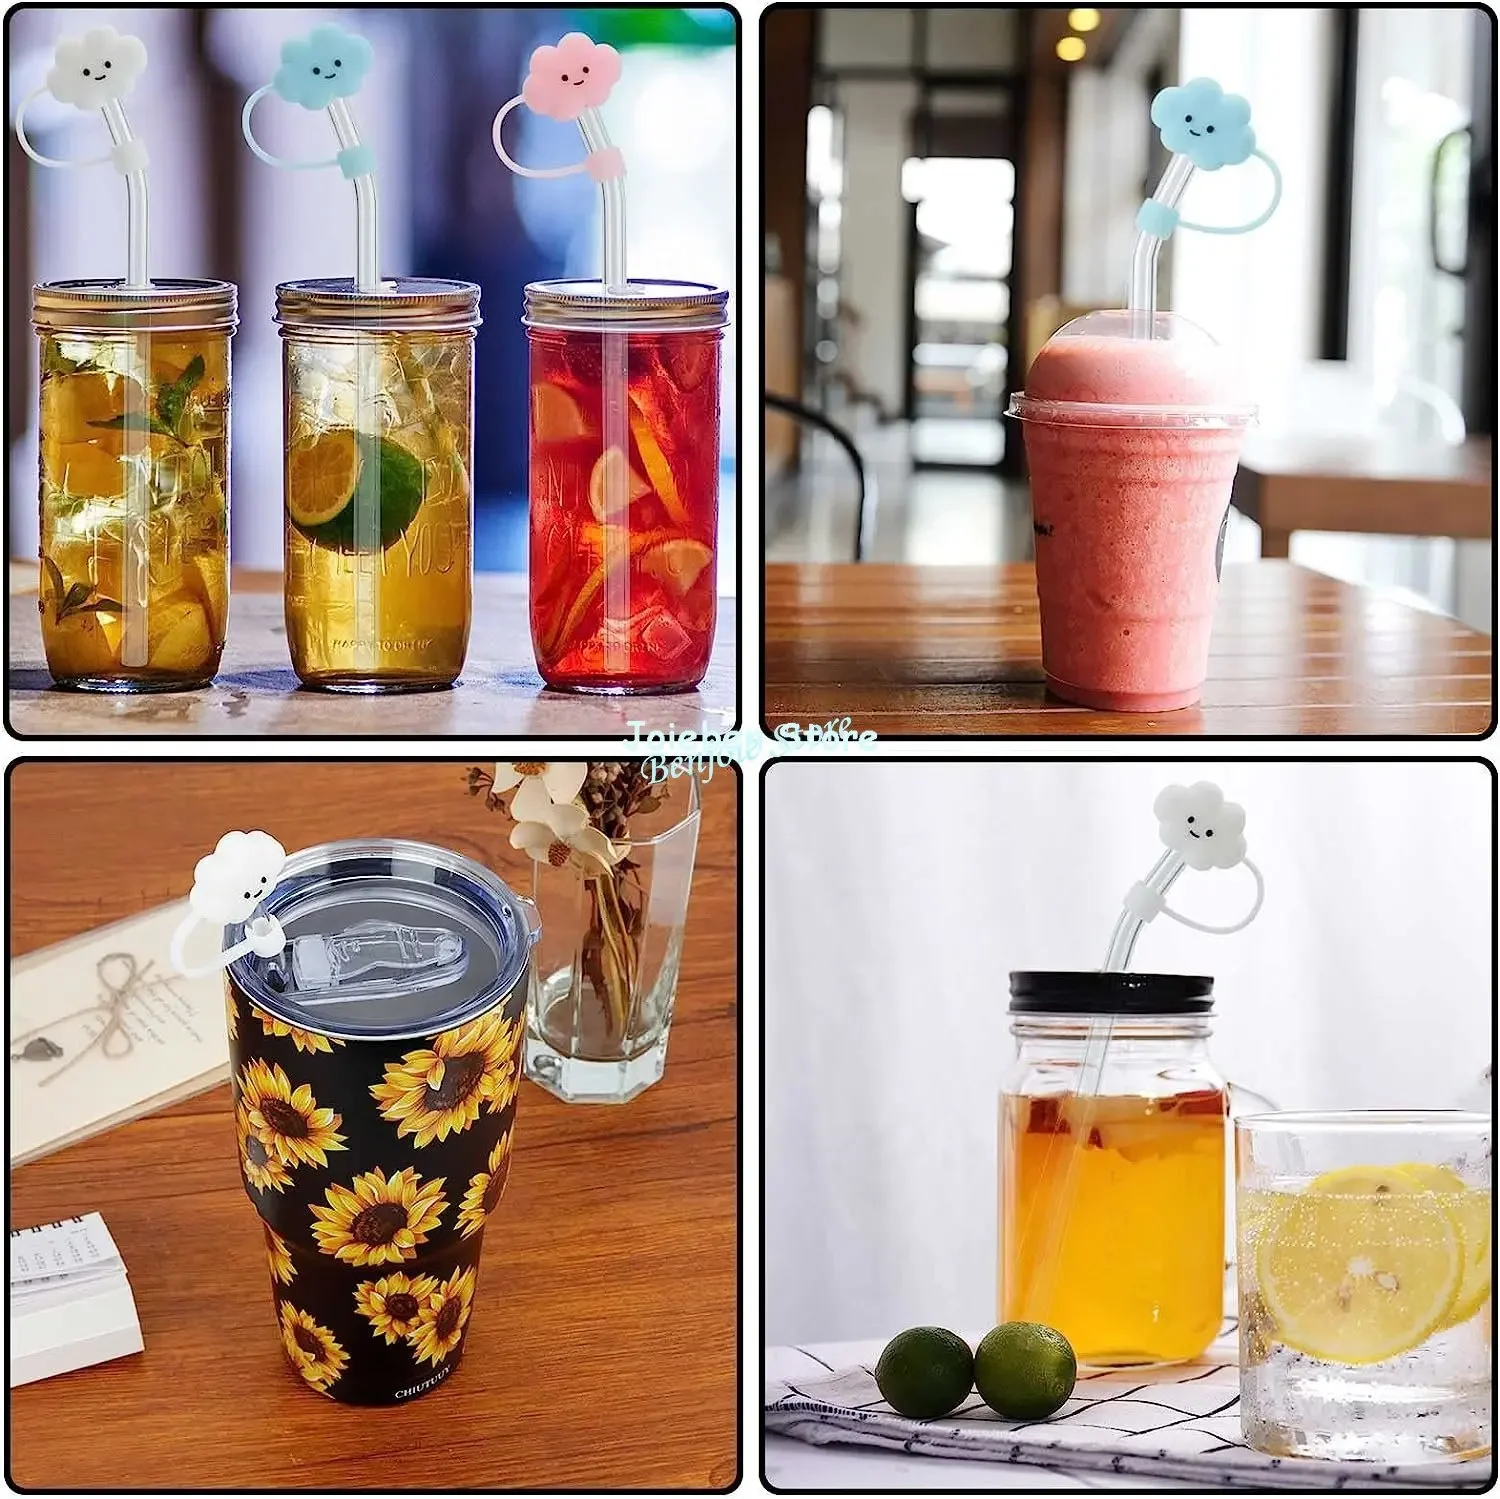 https://ae01.alicdn.com/kf/S76b8f019085e46f187515395491a6be7Z/Silicone-Straw-Tips-Cover-6-8mm-Straw-Covers-Cap-Reusable-Drinking-Straws-Cloud-Shape-Dust-Proof.jpg